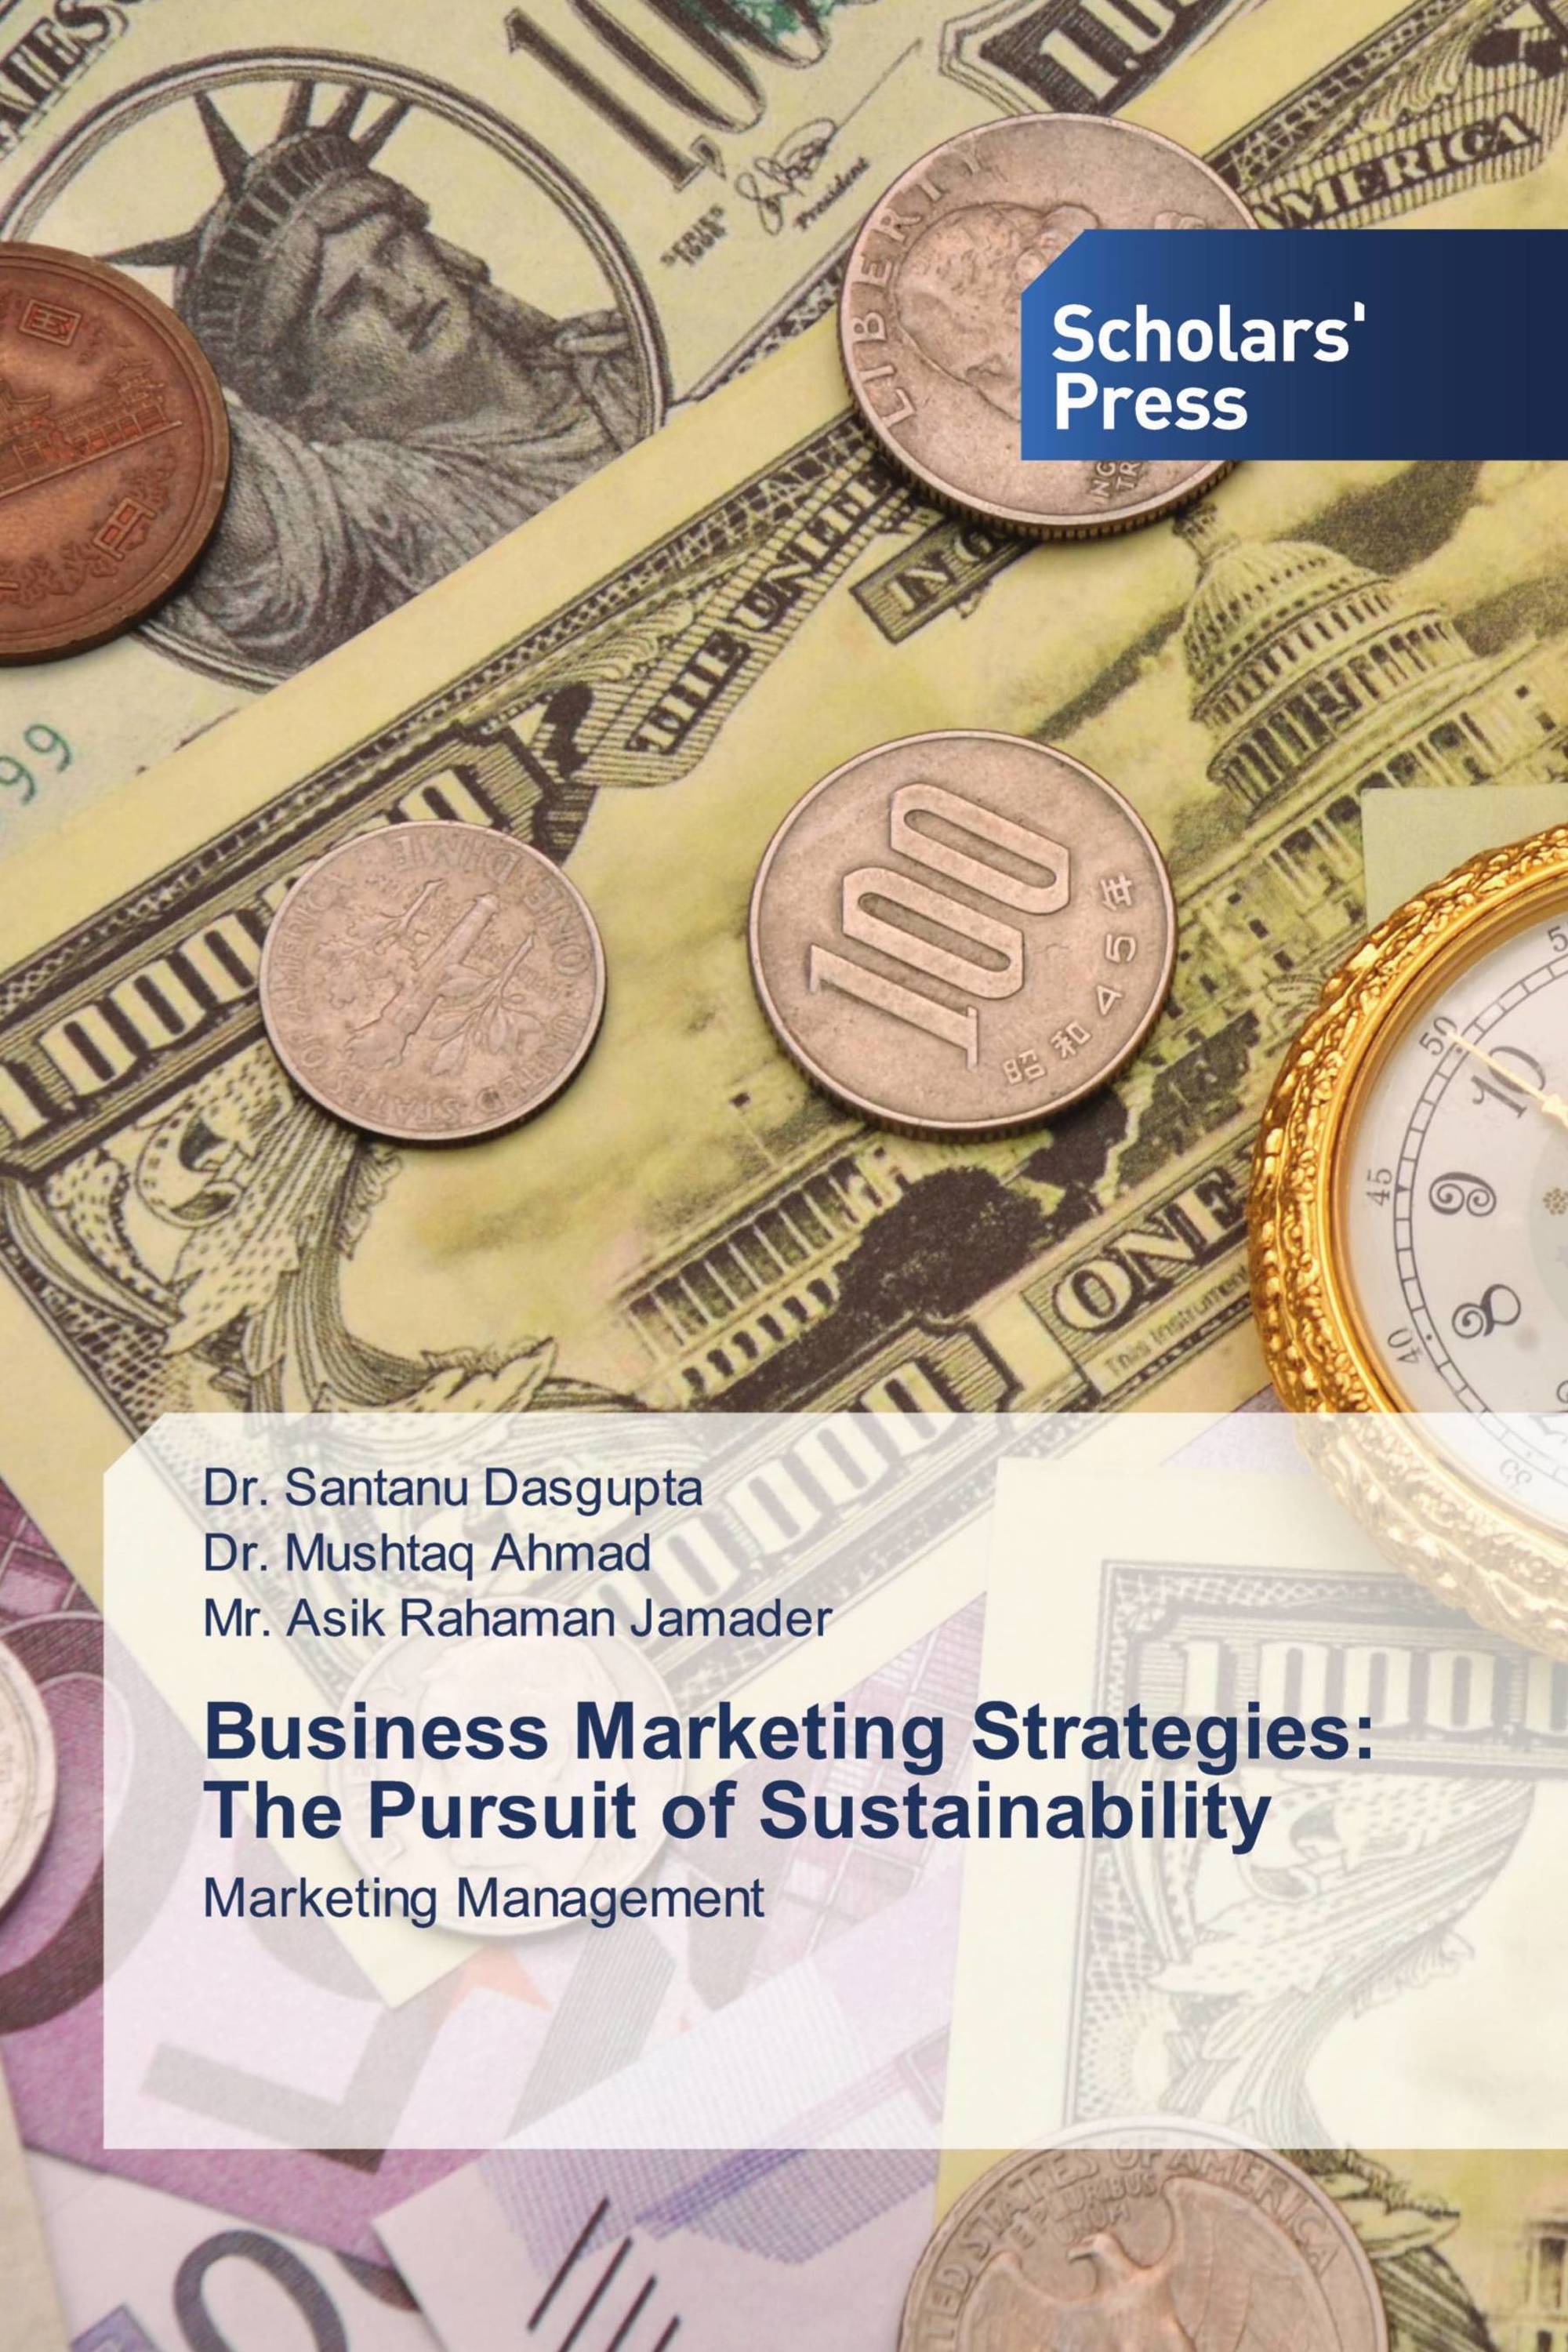 Business Marketing Strategies: The Pursuit of Sustainability